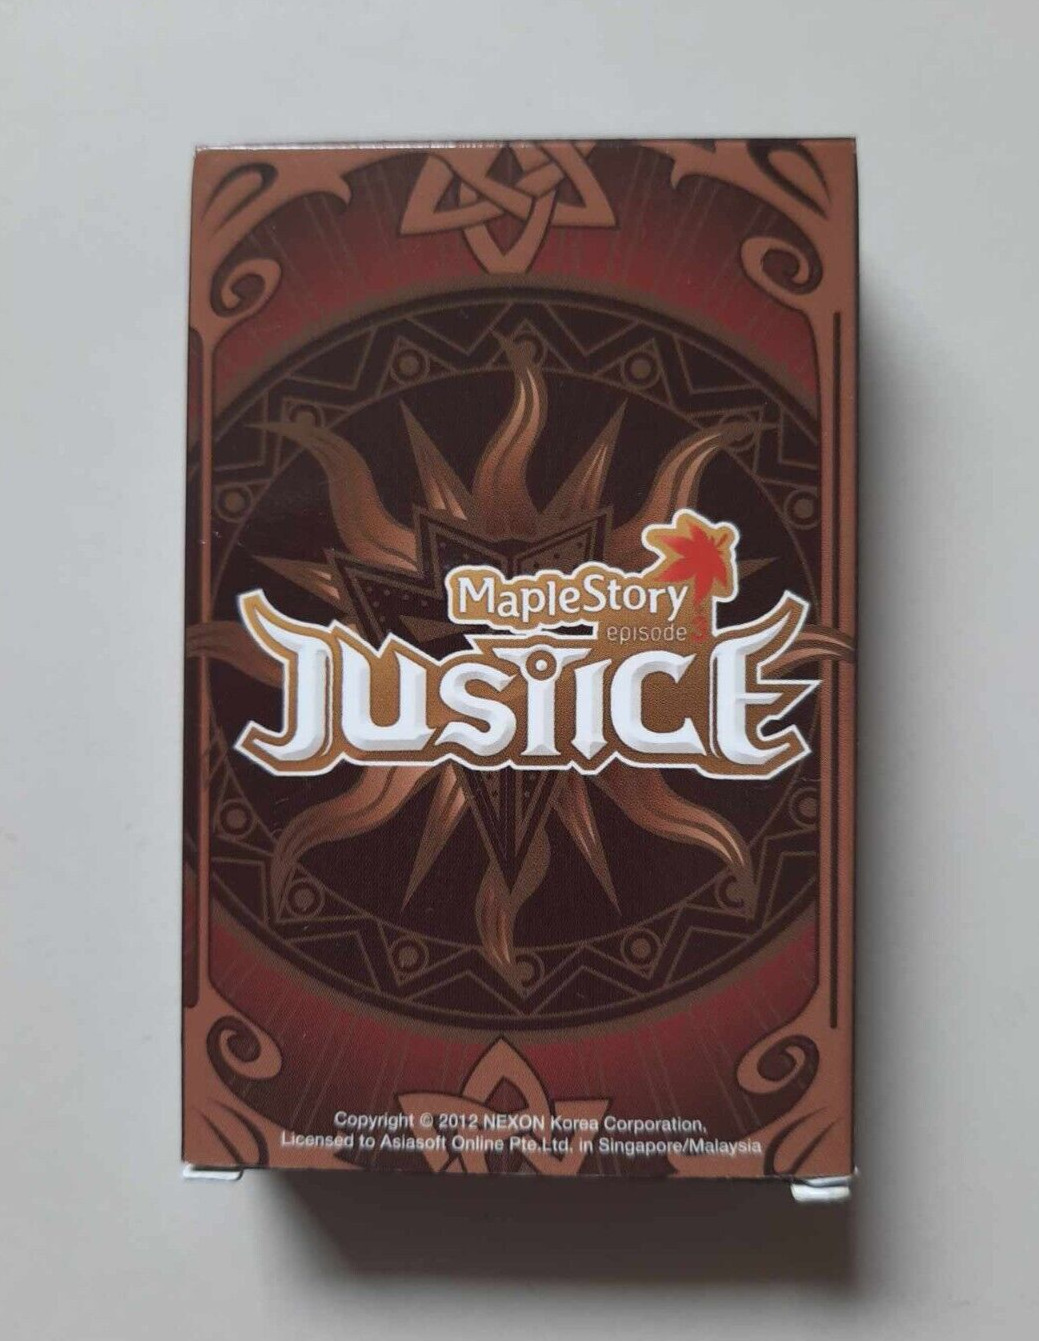 Maplestory Episode 3 Justice 2012 Nexon Playing Cards